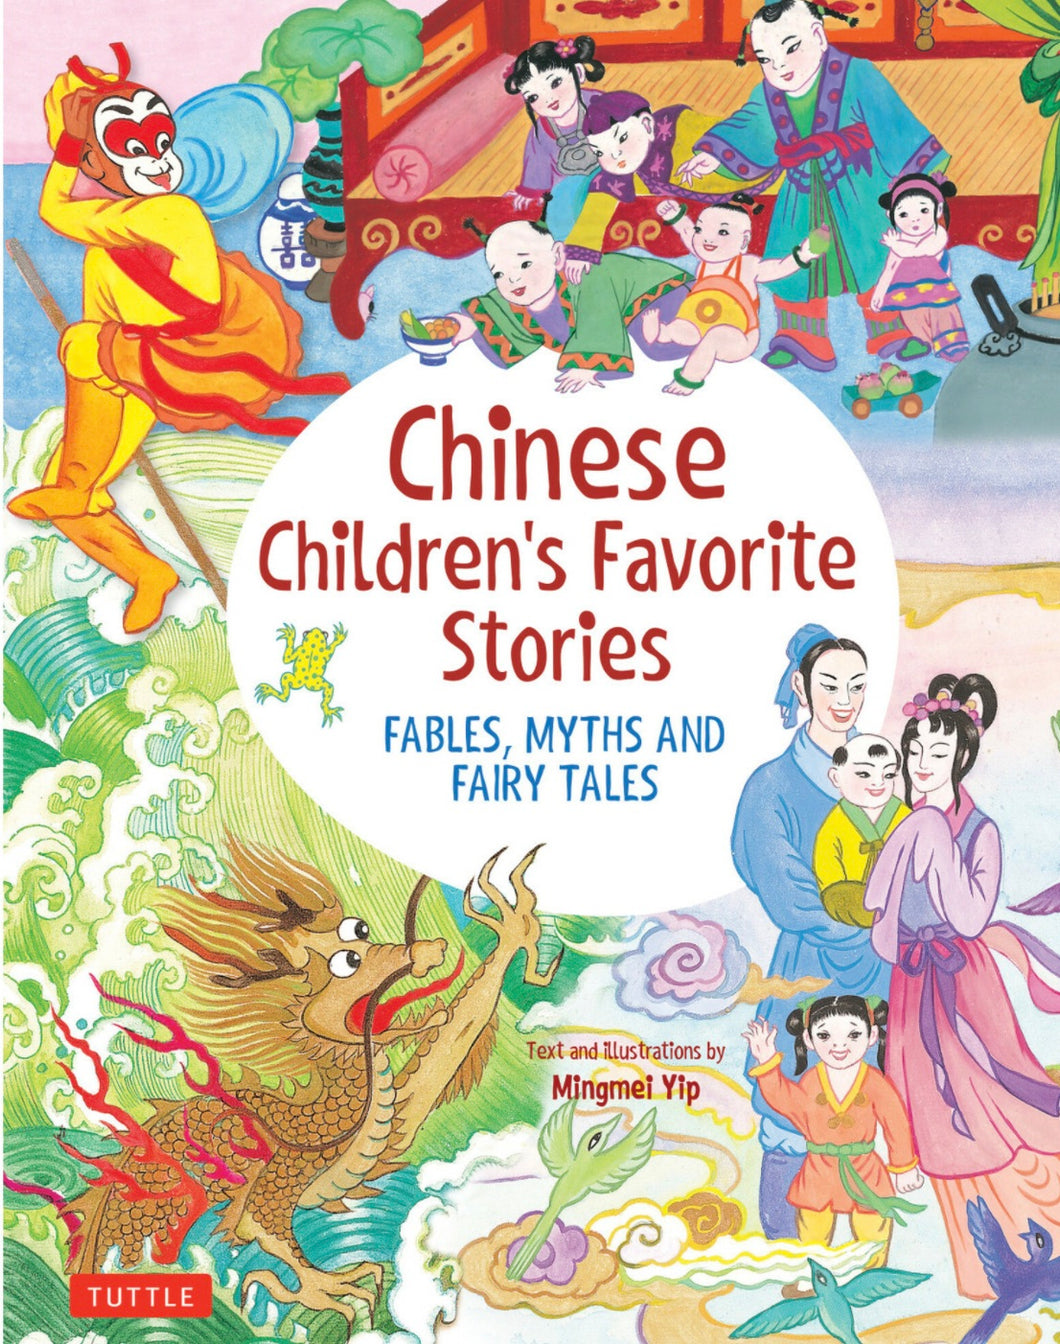 Chinese Children's Favorite Stories: Fables, Myths and Fairytales